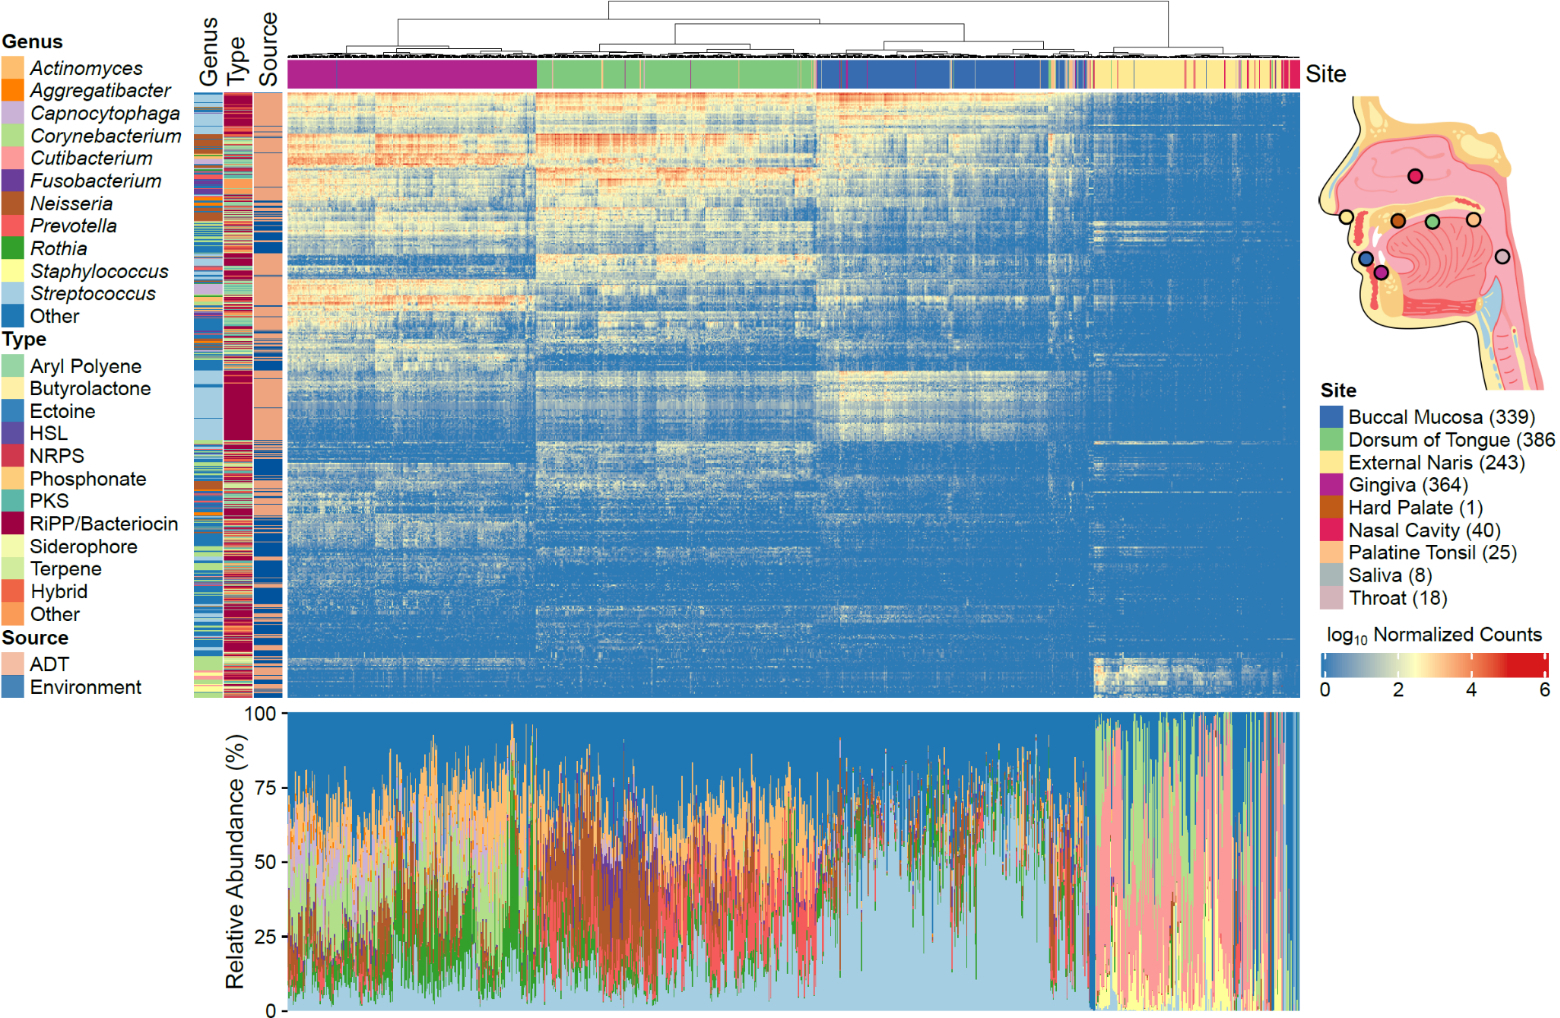 This is a heat map showing the abundance of genes for secondary metabolite biosynthetic gene clusters (rows) in different metagenome samples from the human aerodigestive tract (columns).